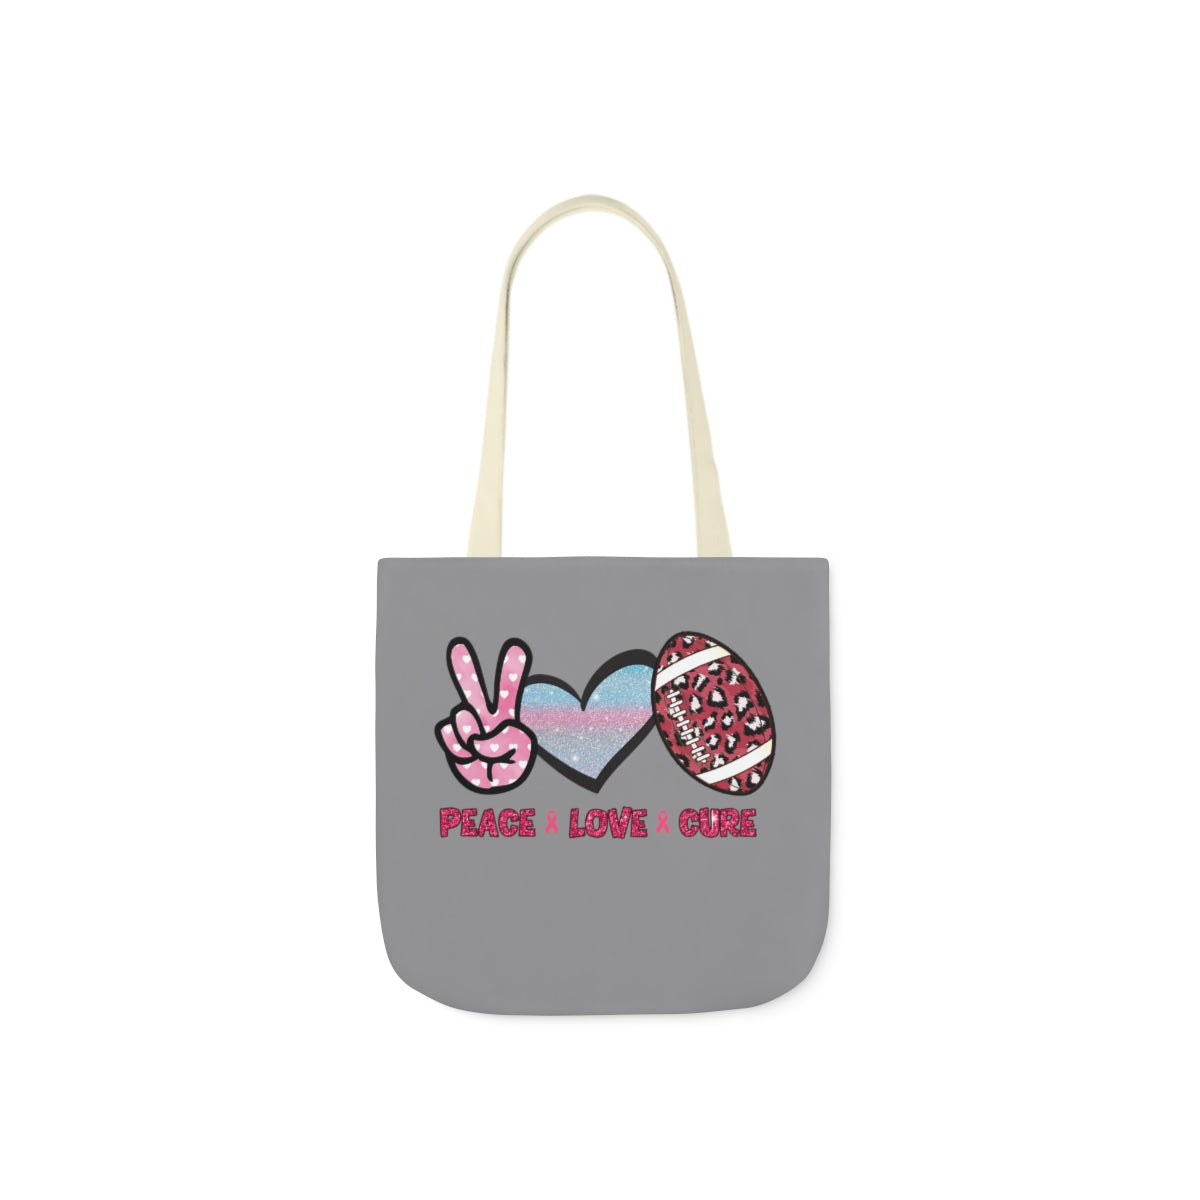 Peace Love Cure Canvas Tote Bag| Breast Cancer Tote Bag